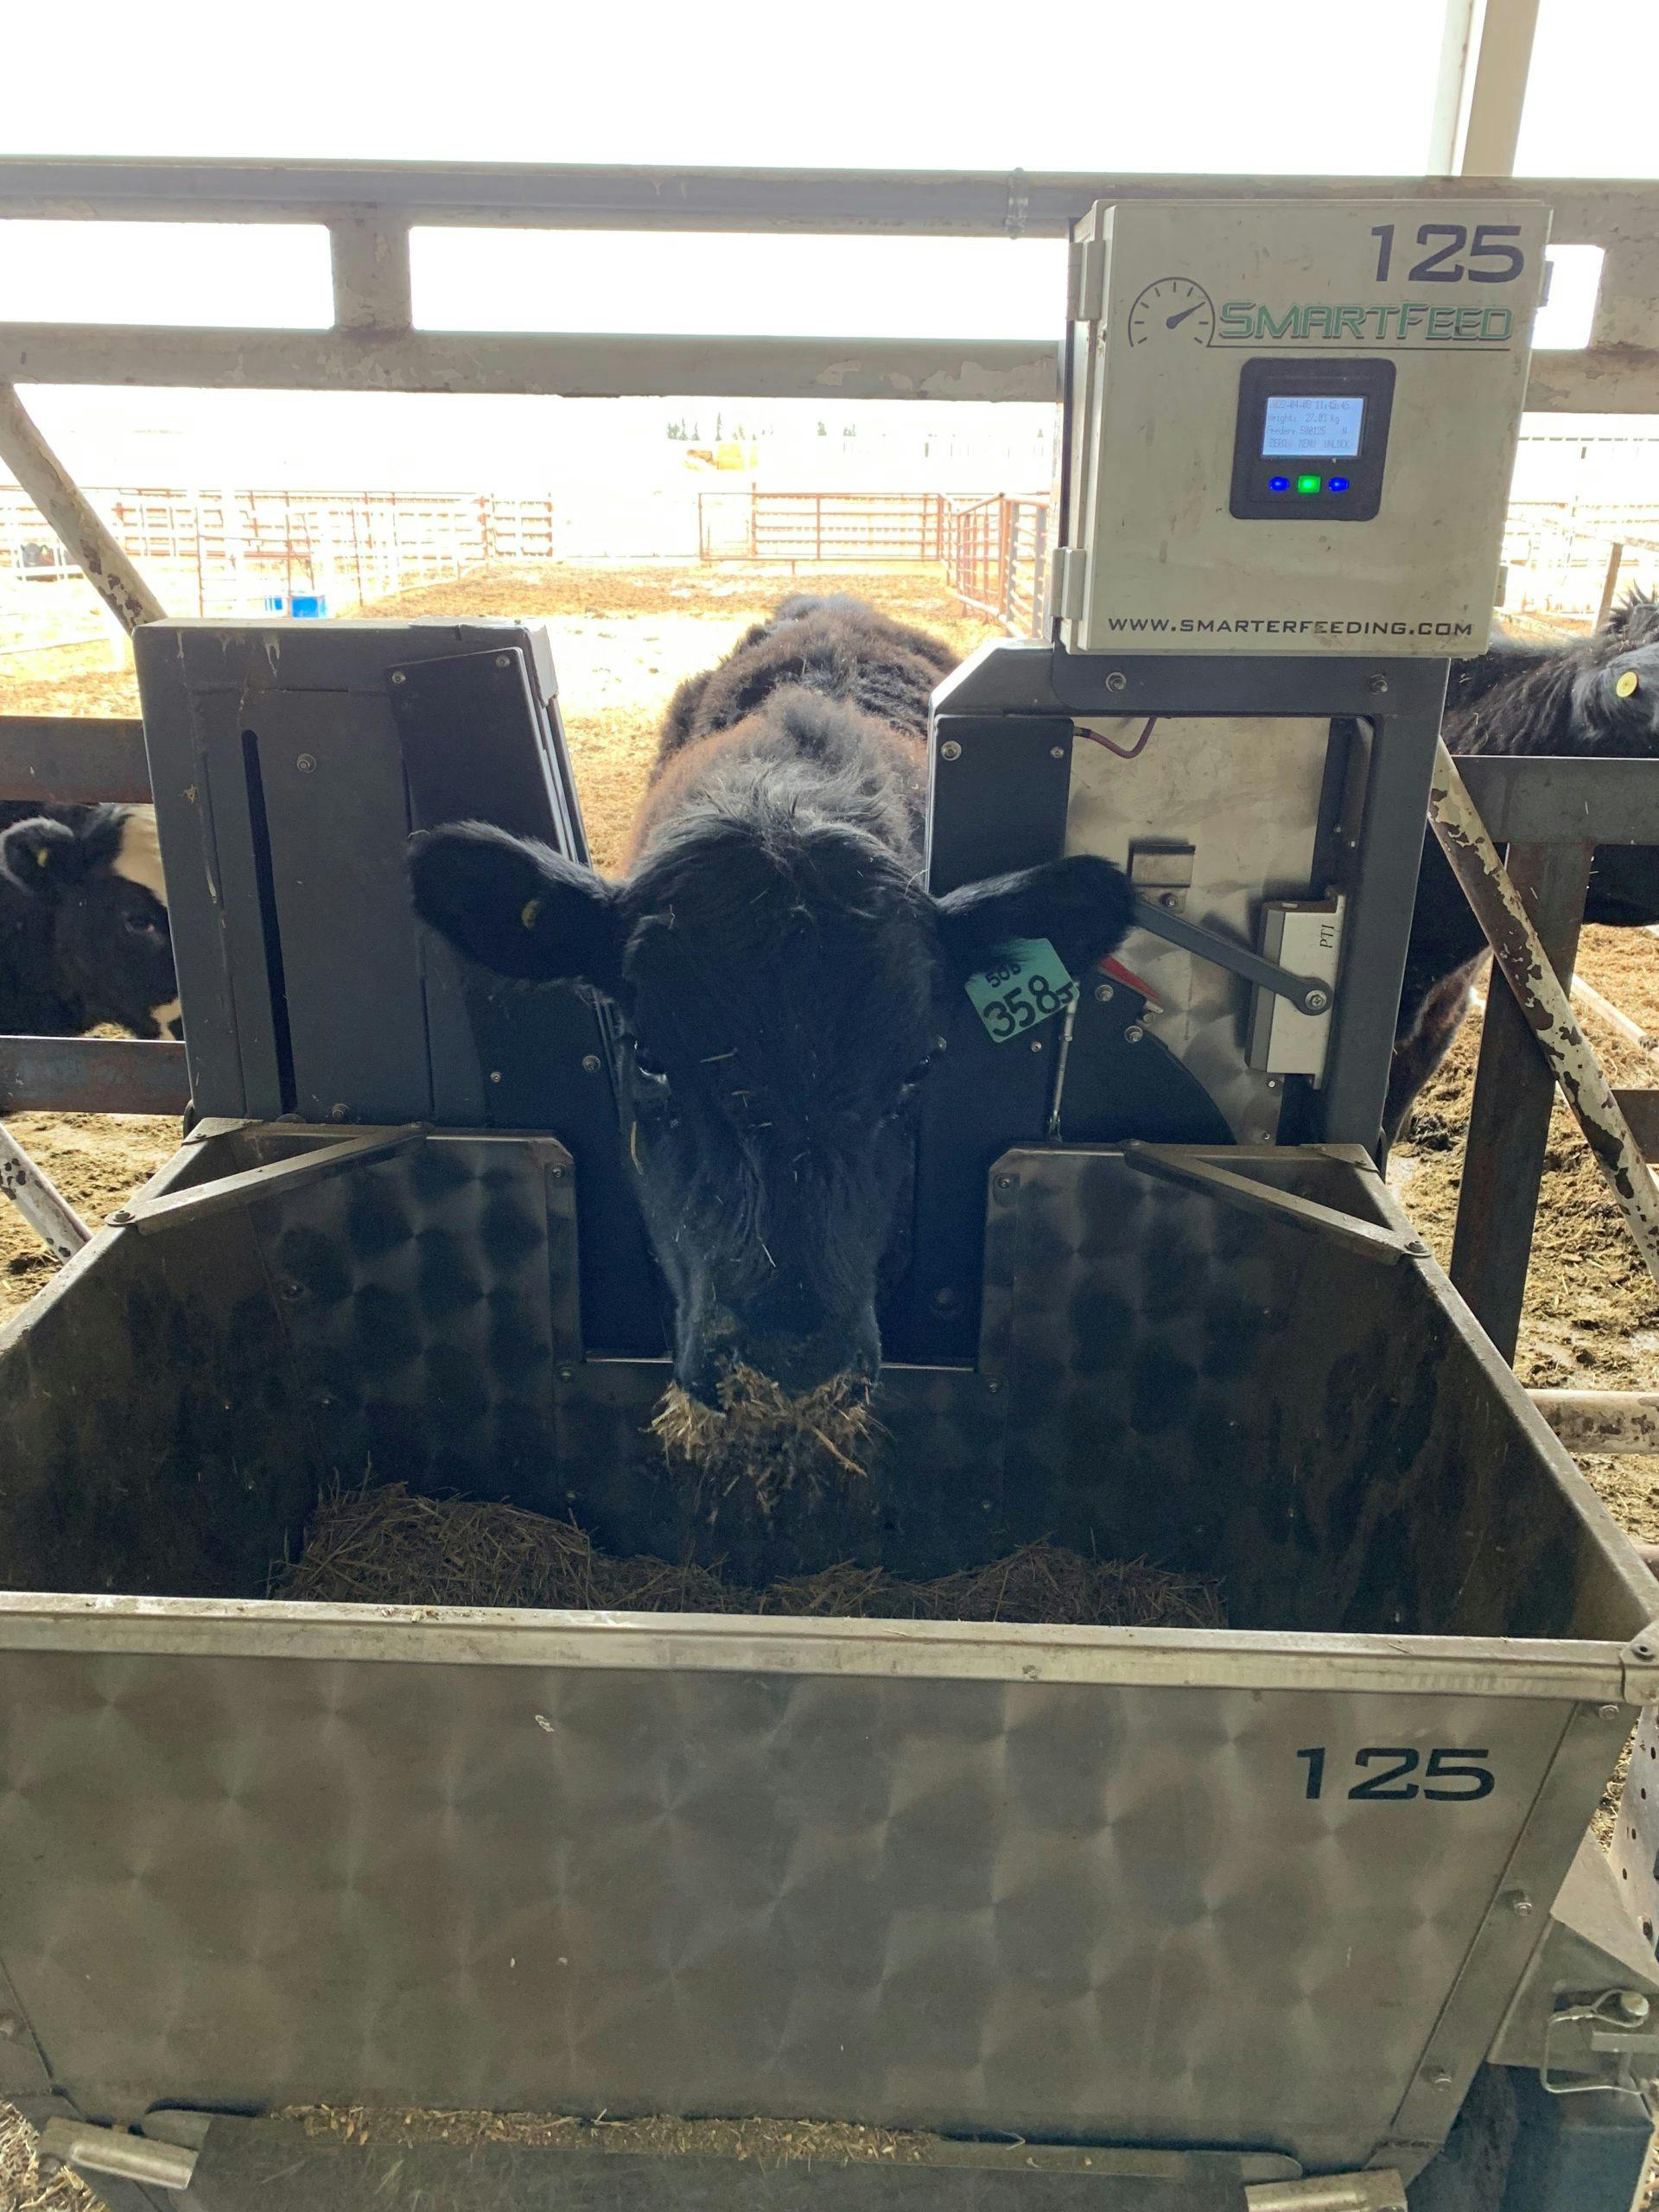 heifer-at-lakeland-college-eating-feed-from-smart-feed-machine